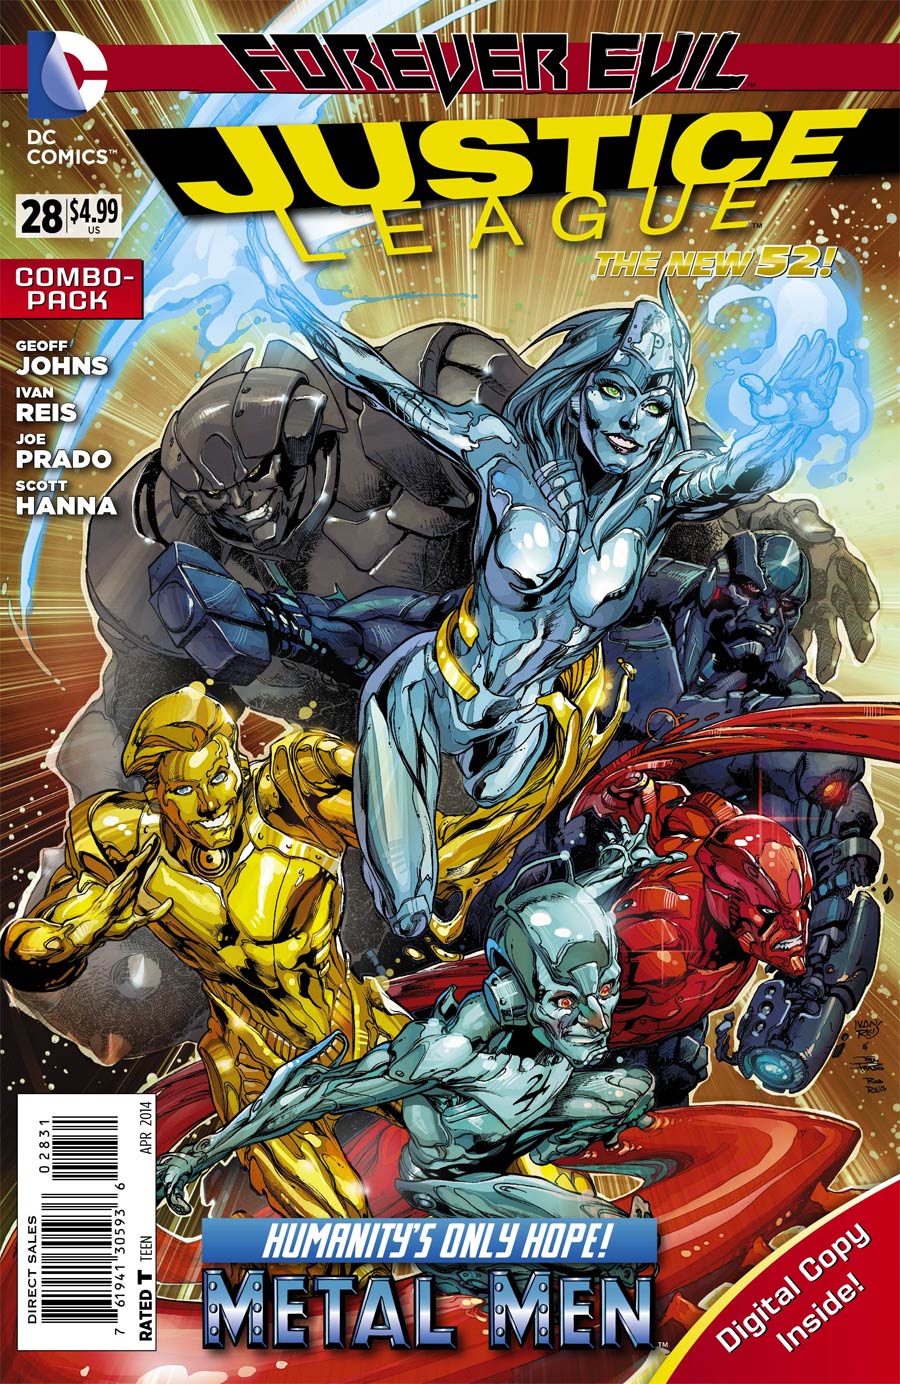 Justice League Vol 2 #28 Cover C Combo Pack Without Polybag (Forever Evil Tie-In)